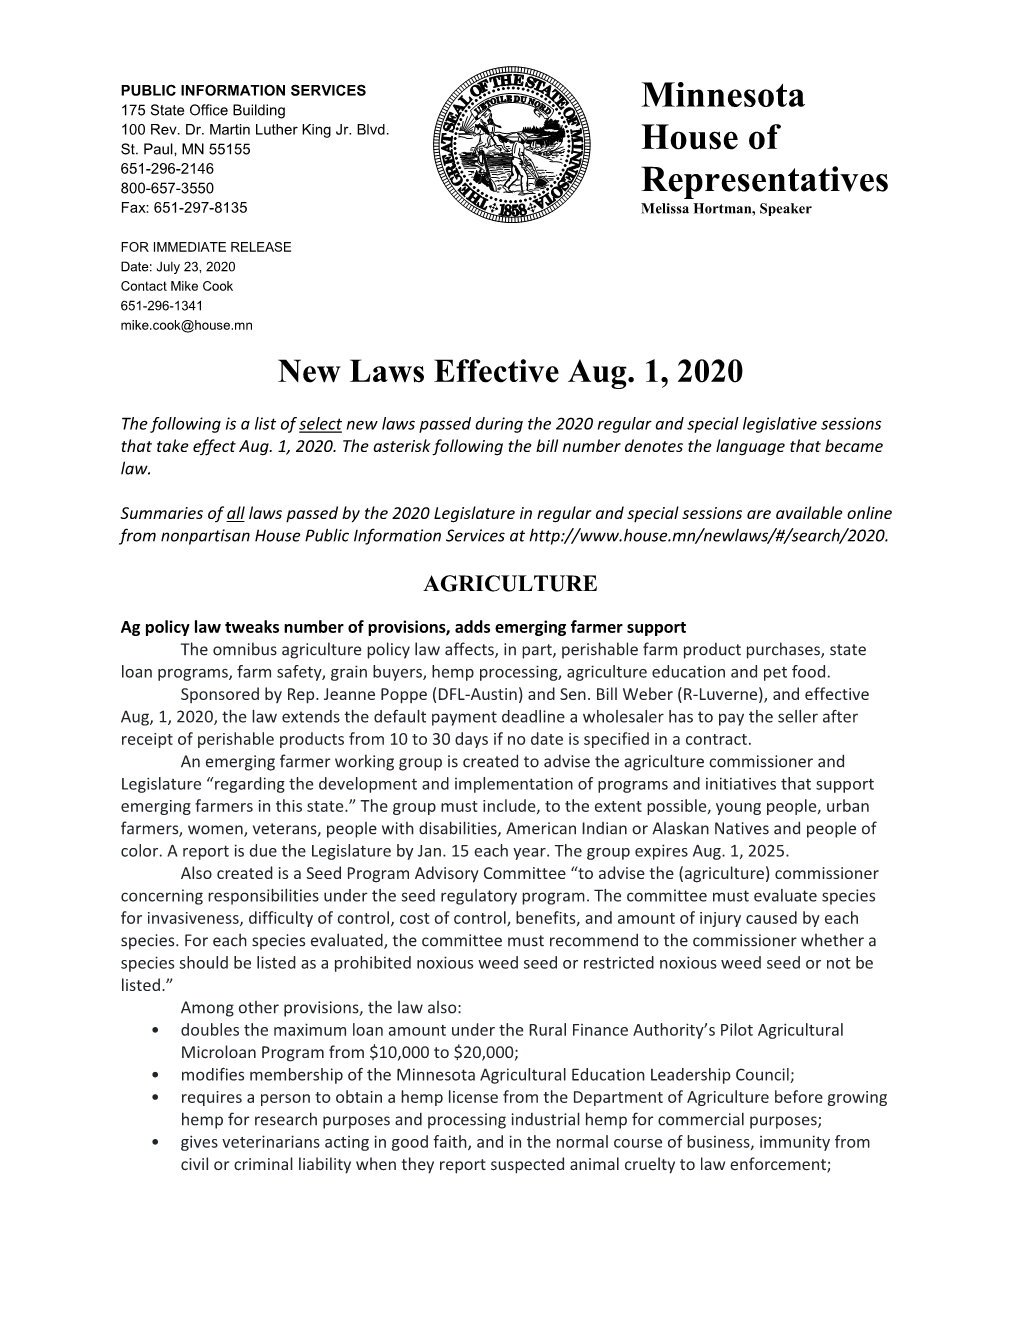 New Laws Effective Aug. 1, 2020